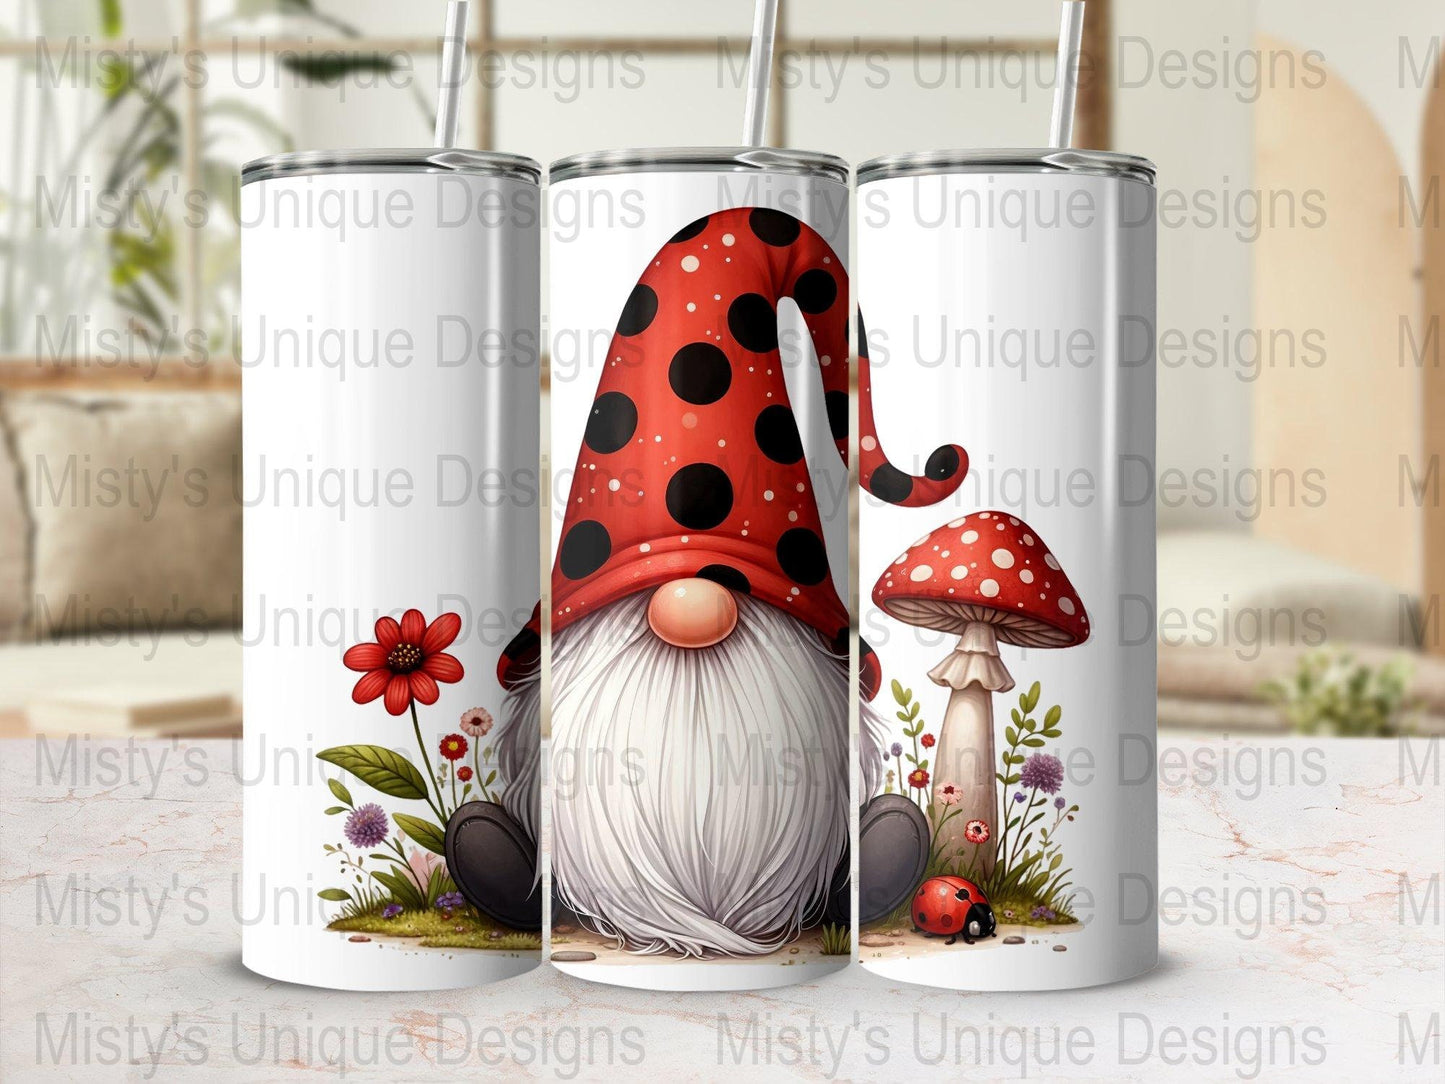 Whimsical Gnome Clipart, Digital Download, Garden Fantasy Illustration, Mushroom Graphics, Red Polka Dot Hat, Cute Fairy Tale PNG